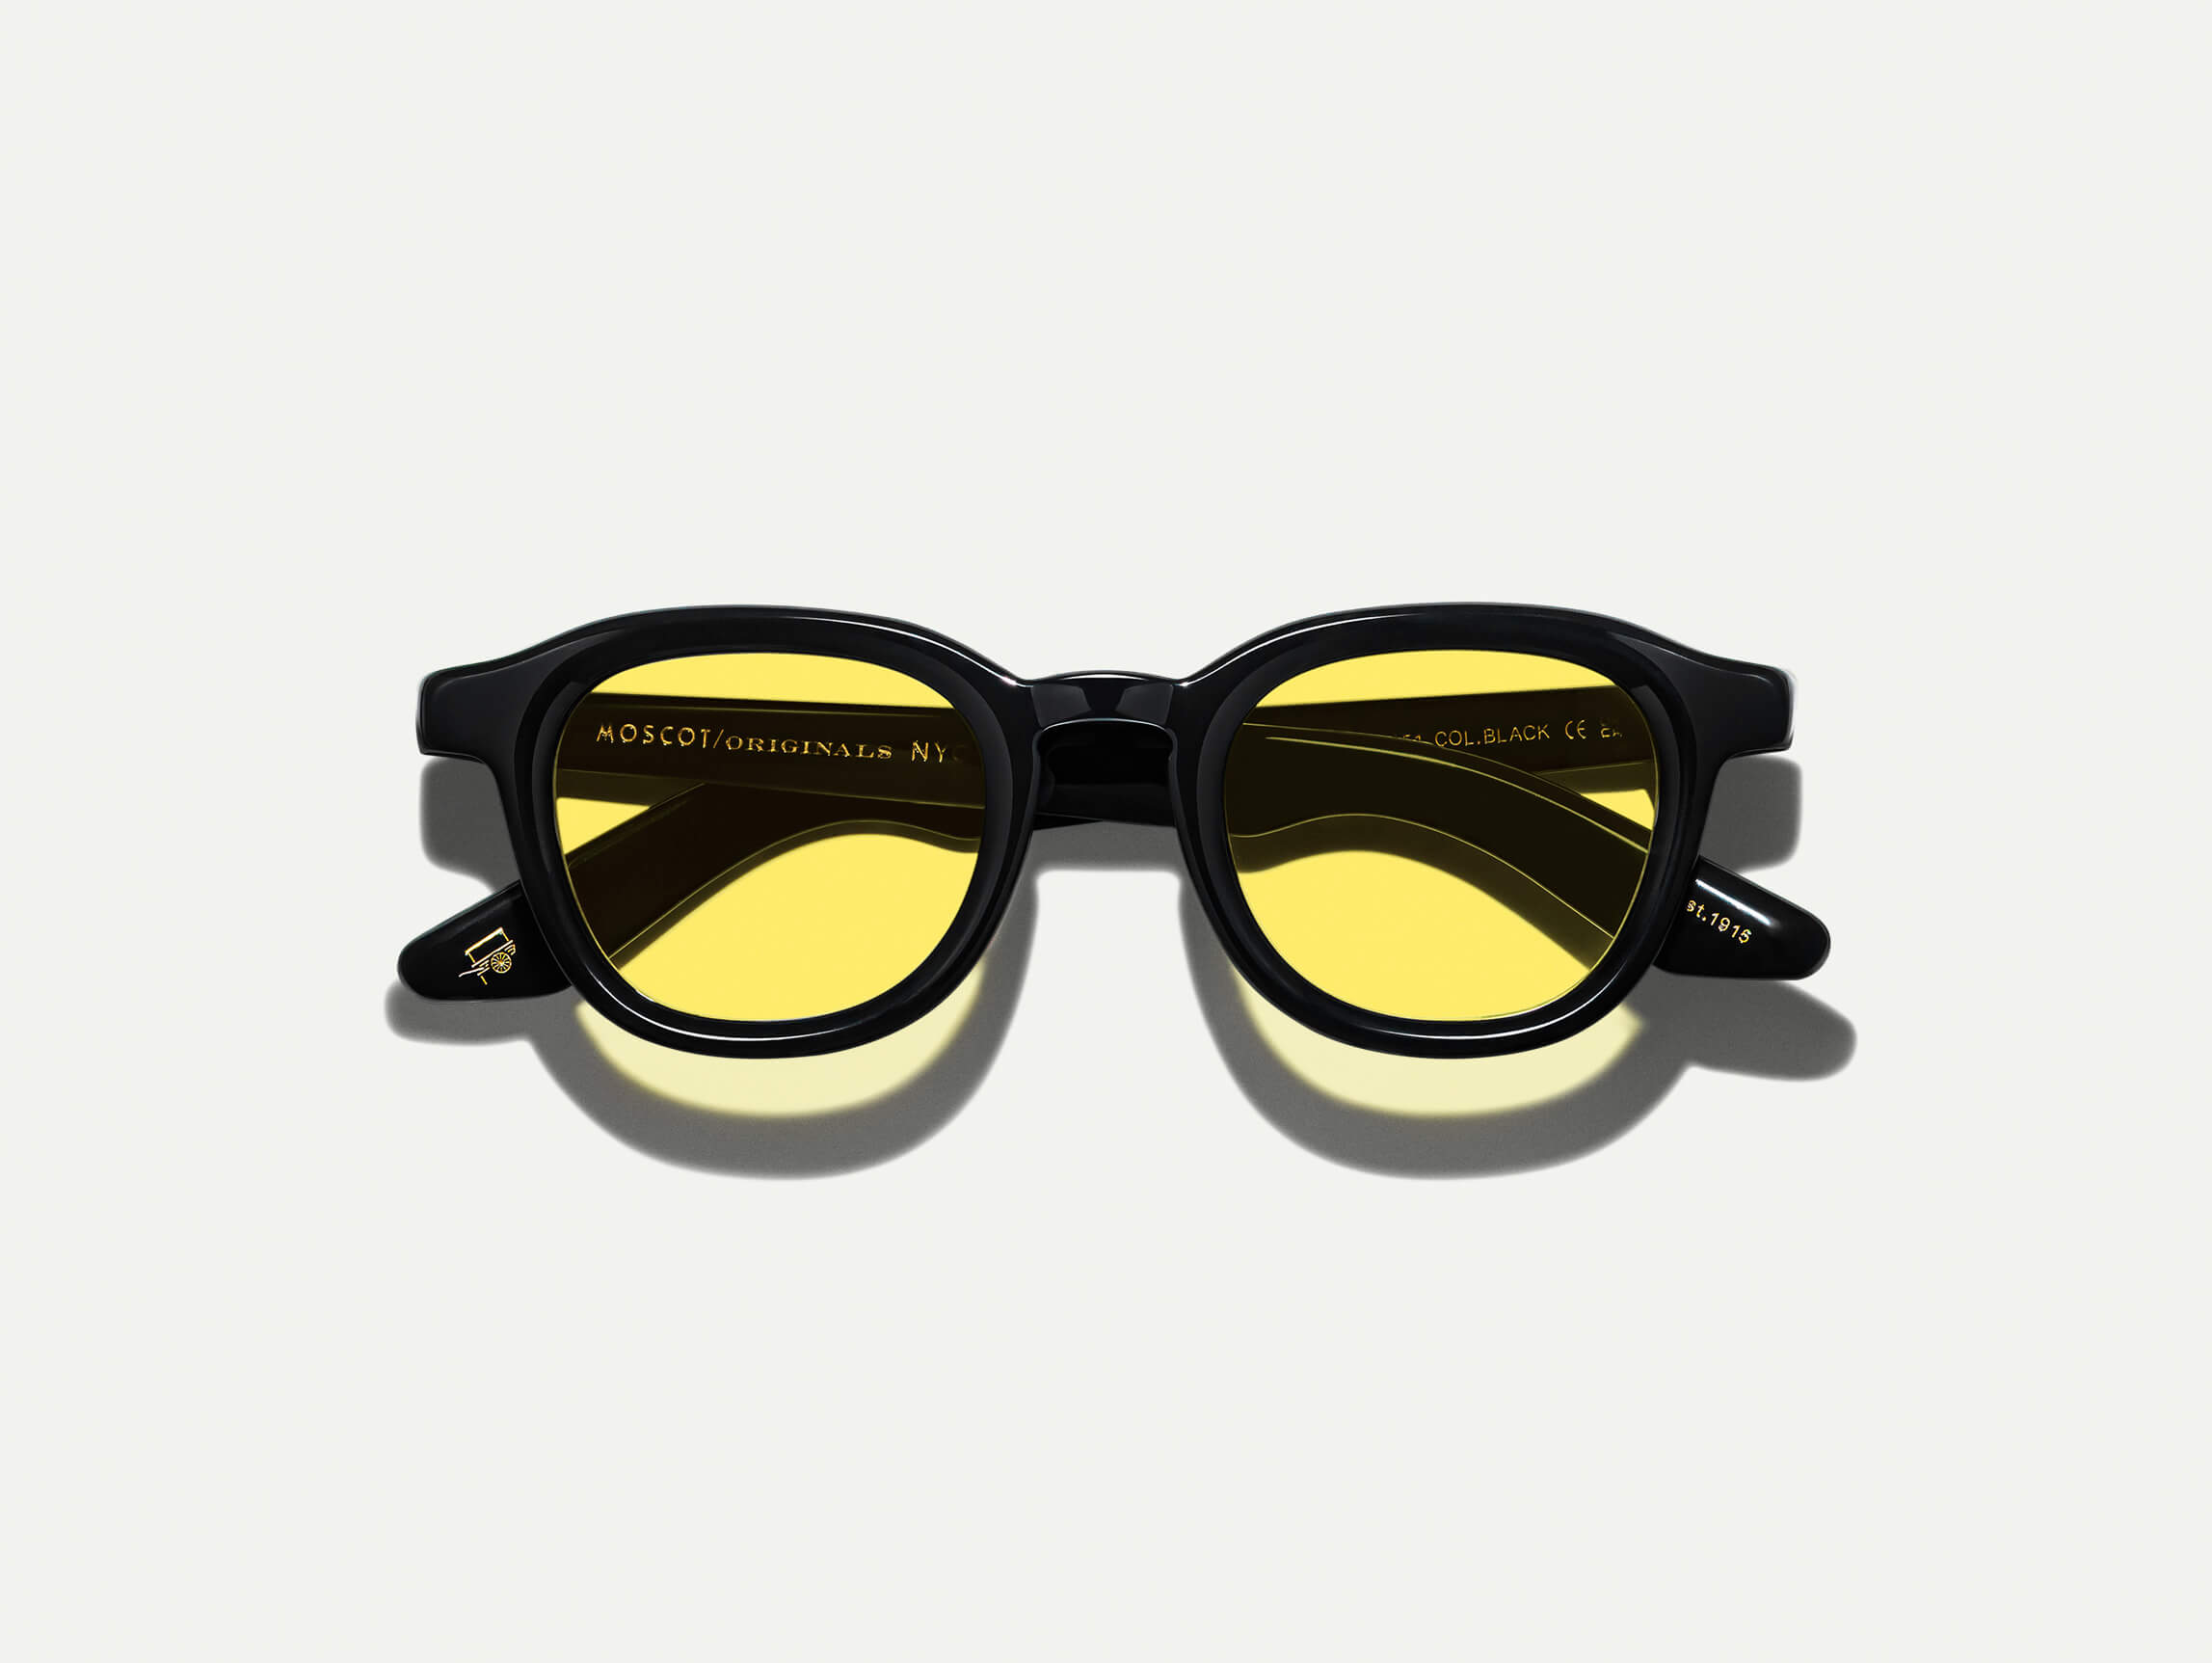 The DAHVEN Black with Mellow Yellow Tinted Lenses